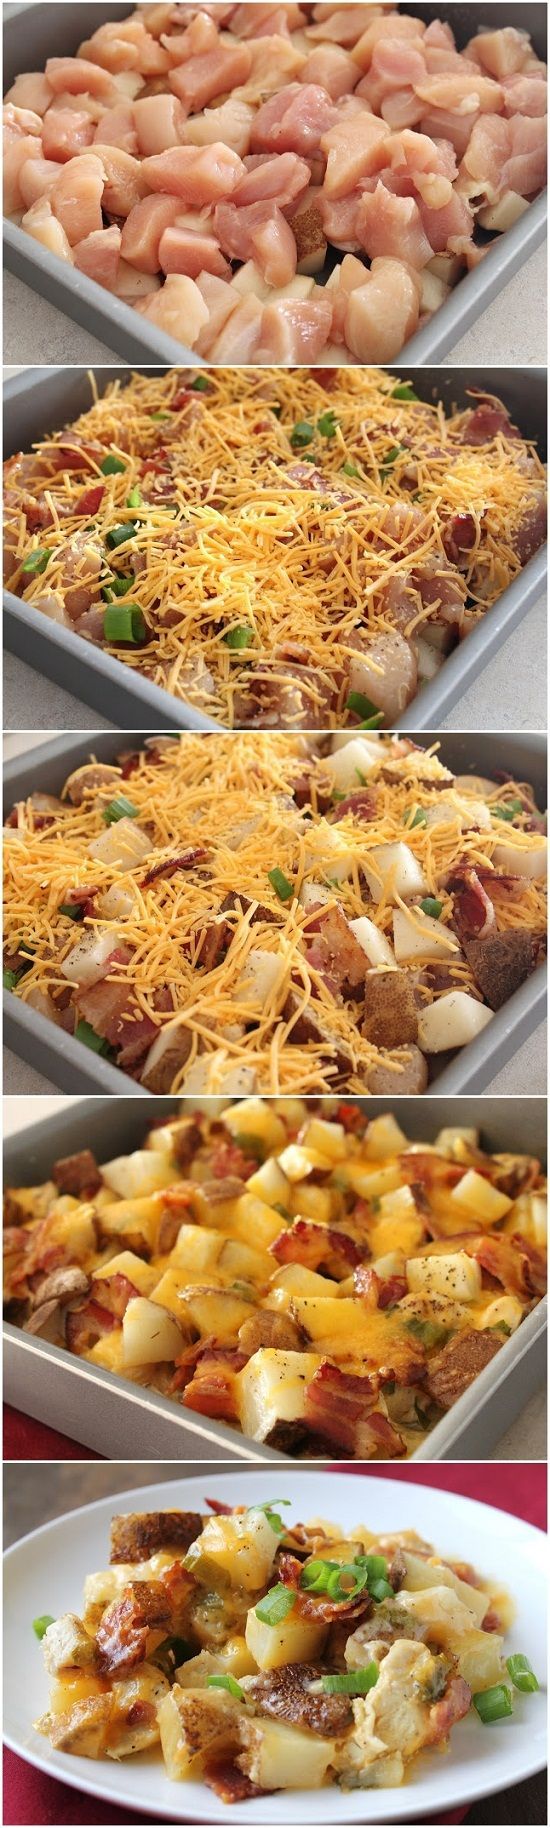 Loaded Baked Potato & Chicken Casserole this looks AMAZING!!